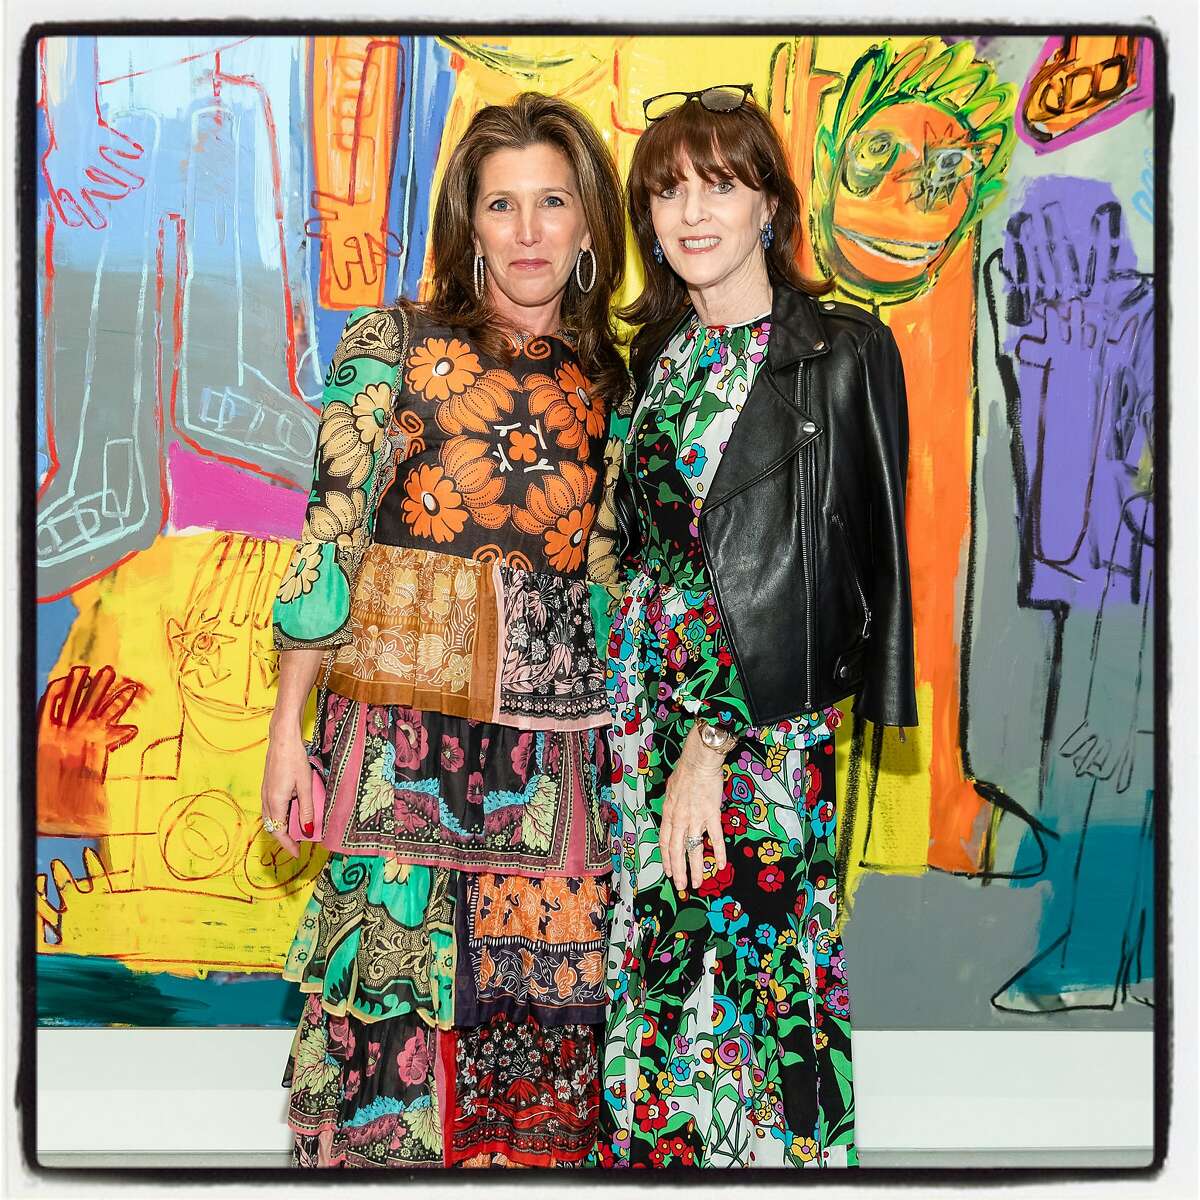 Sloan Barnett (left) and Allison Speer at Gagosian Gallery for the "High Times" opening. May 31, 2019.